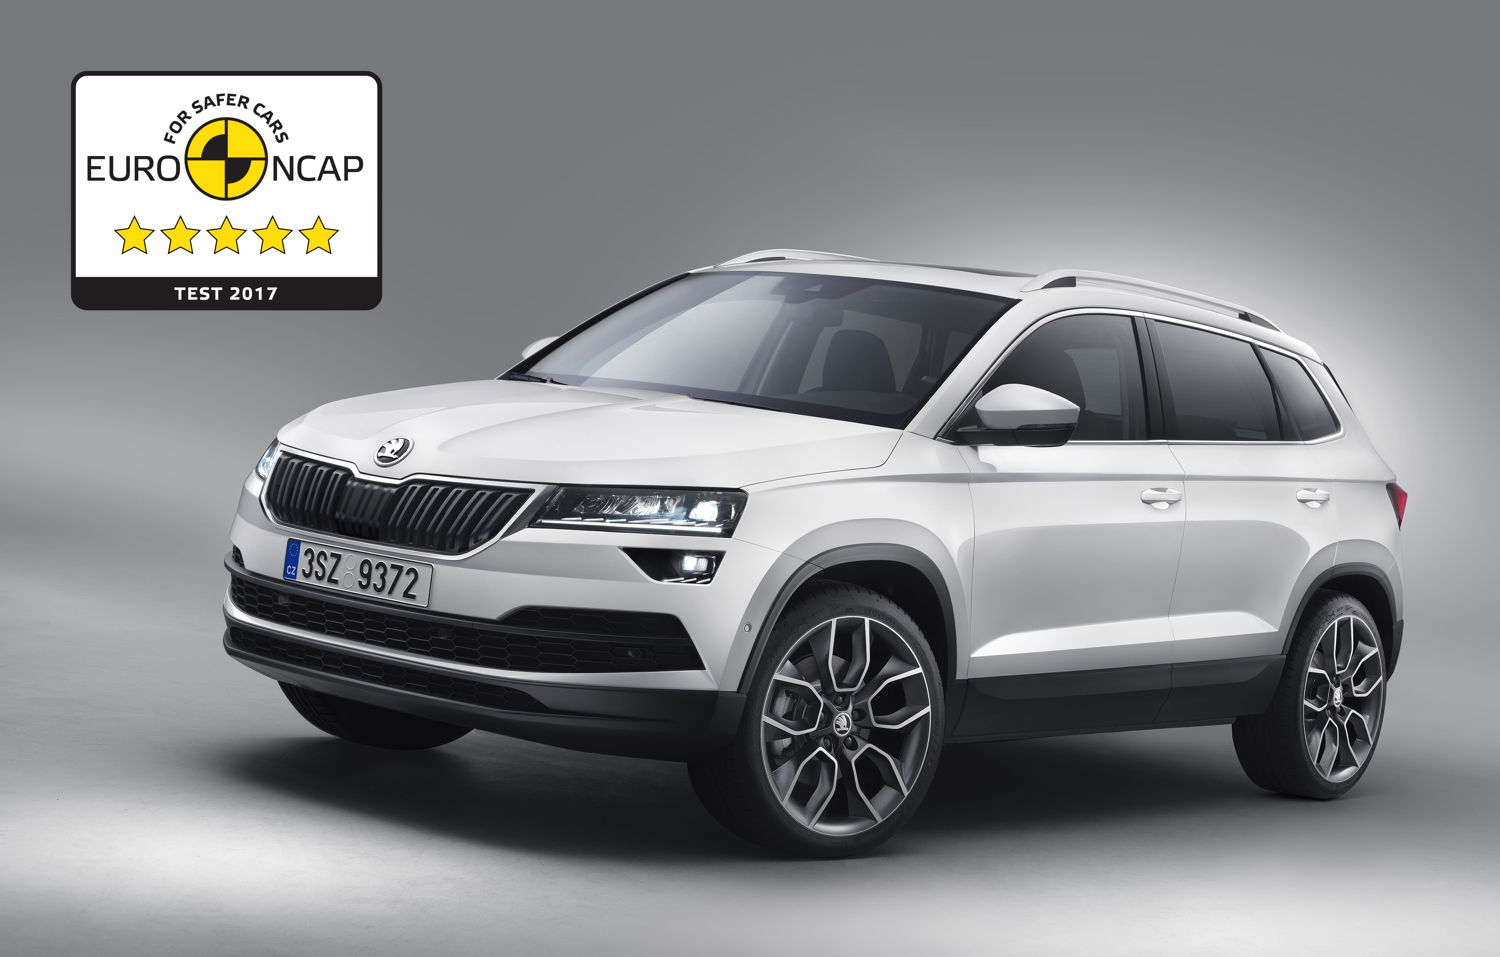 The independent European New Car Assessment Program (Euro NCAP) has assessed the compact SUV. The ŠKODA KAROQ is the brand’s second vehicle to receive a five-star rating in the Euro NCAP-Test in 2017 after the ŠKODA KODIAQ.